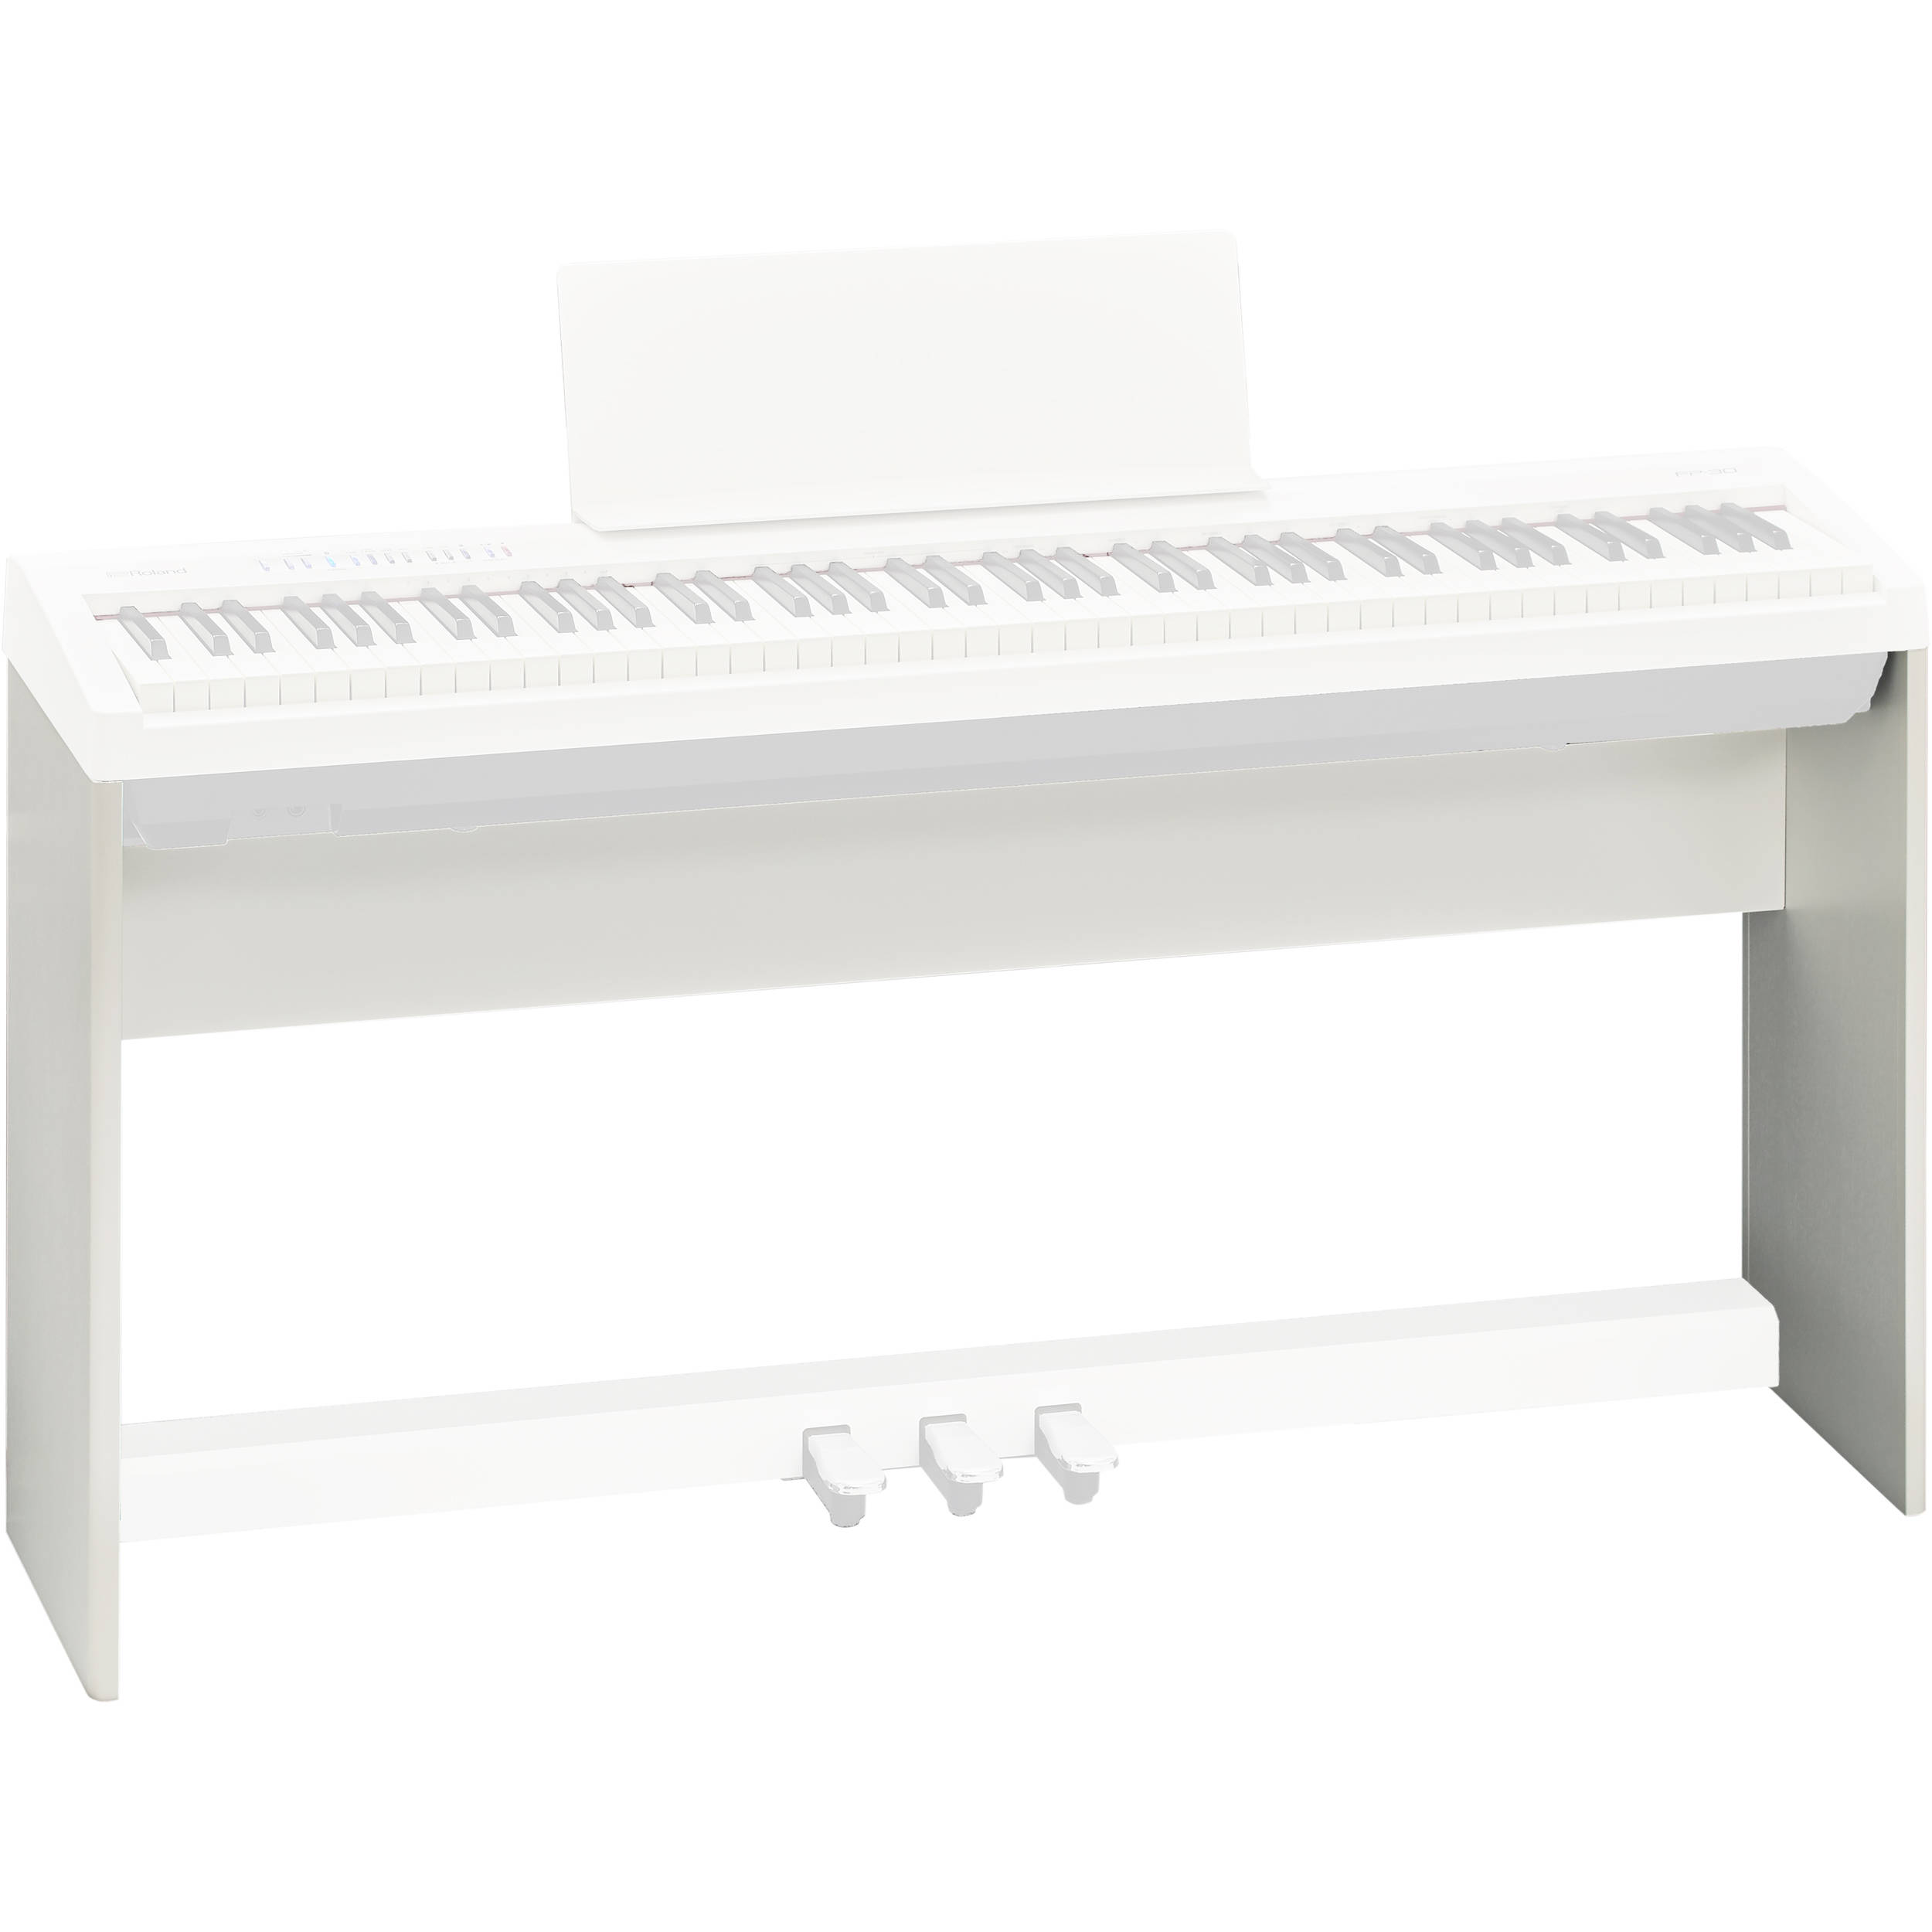 Roland Ksc 70 Stand For Fp 30 Digital Piano White Ksc 70 Wh